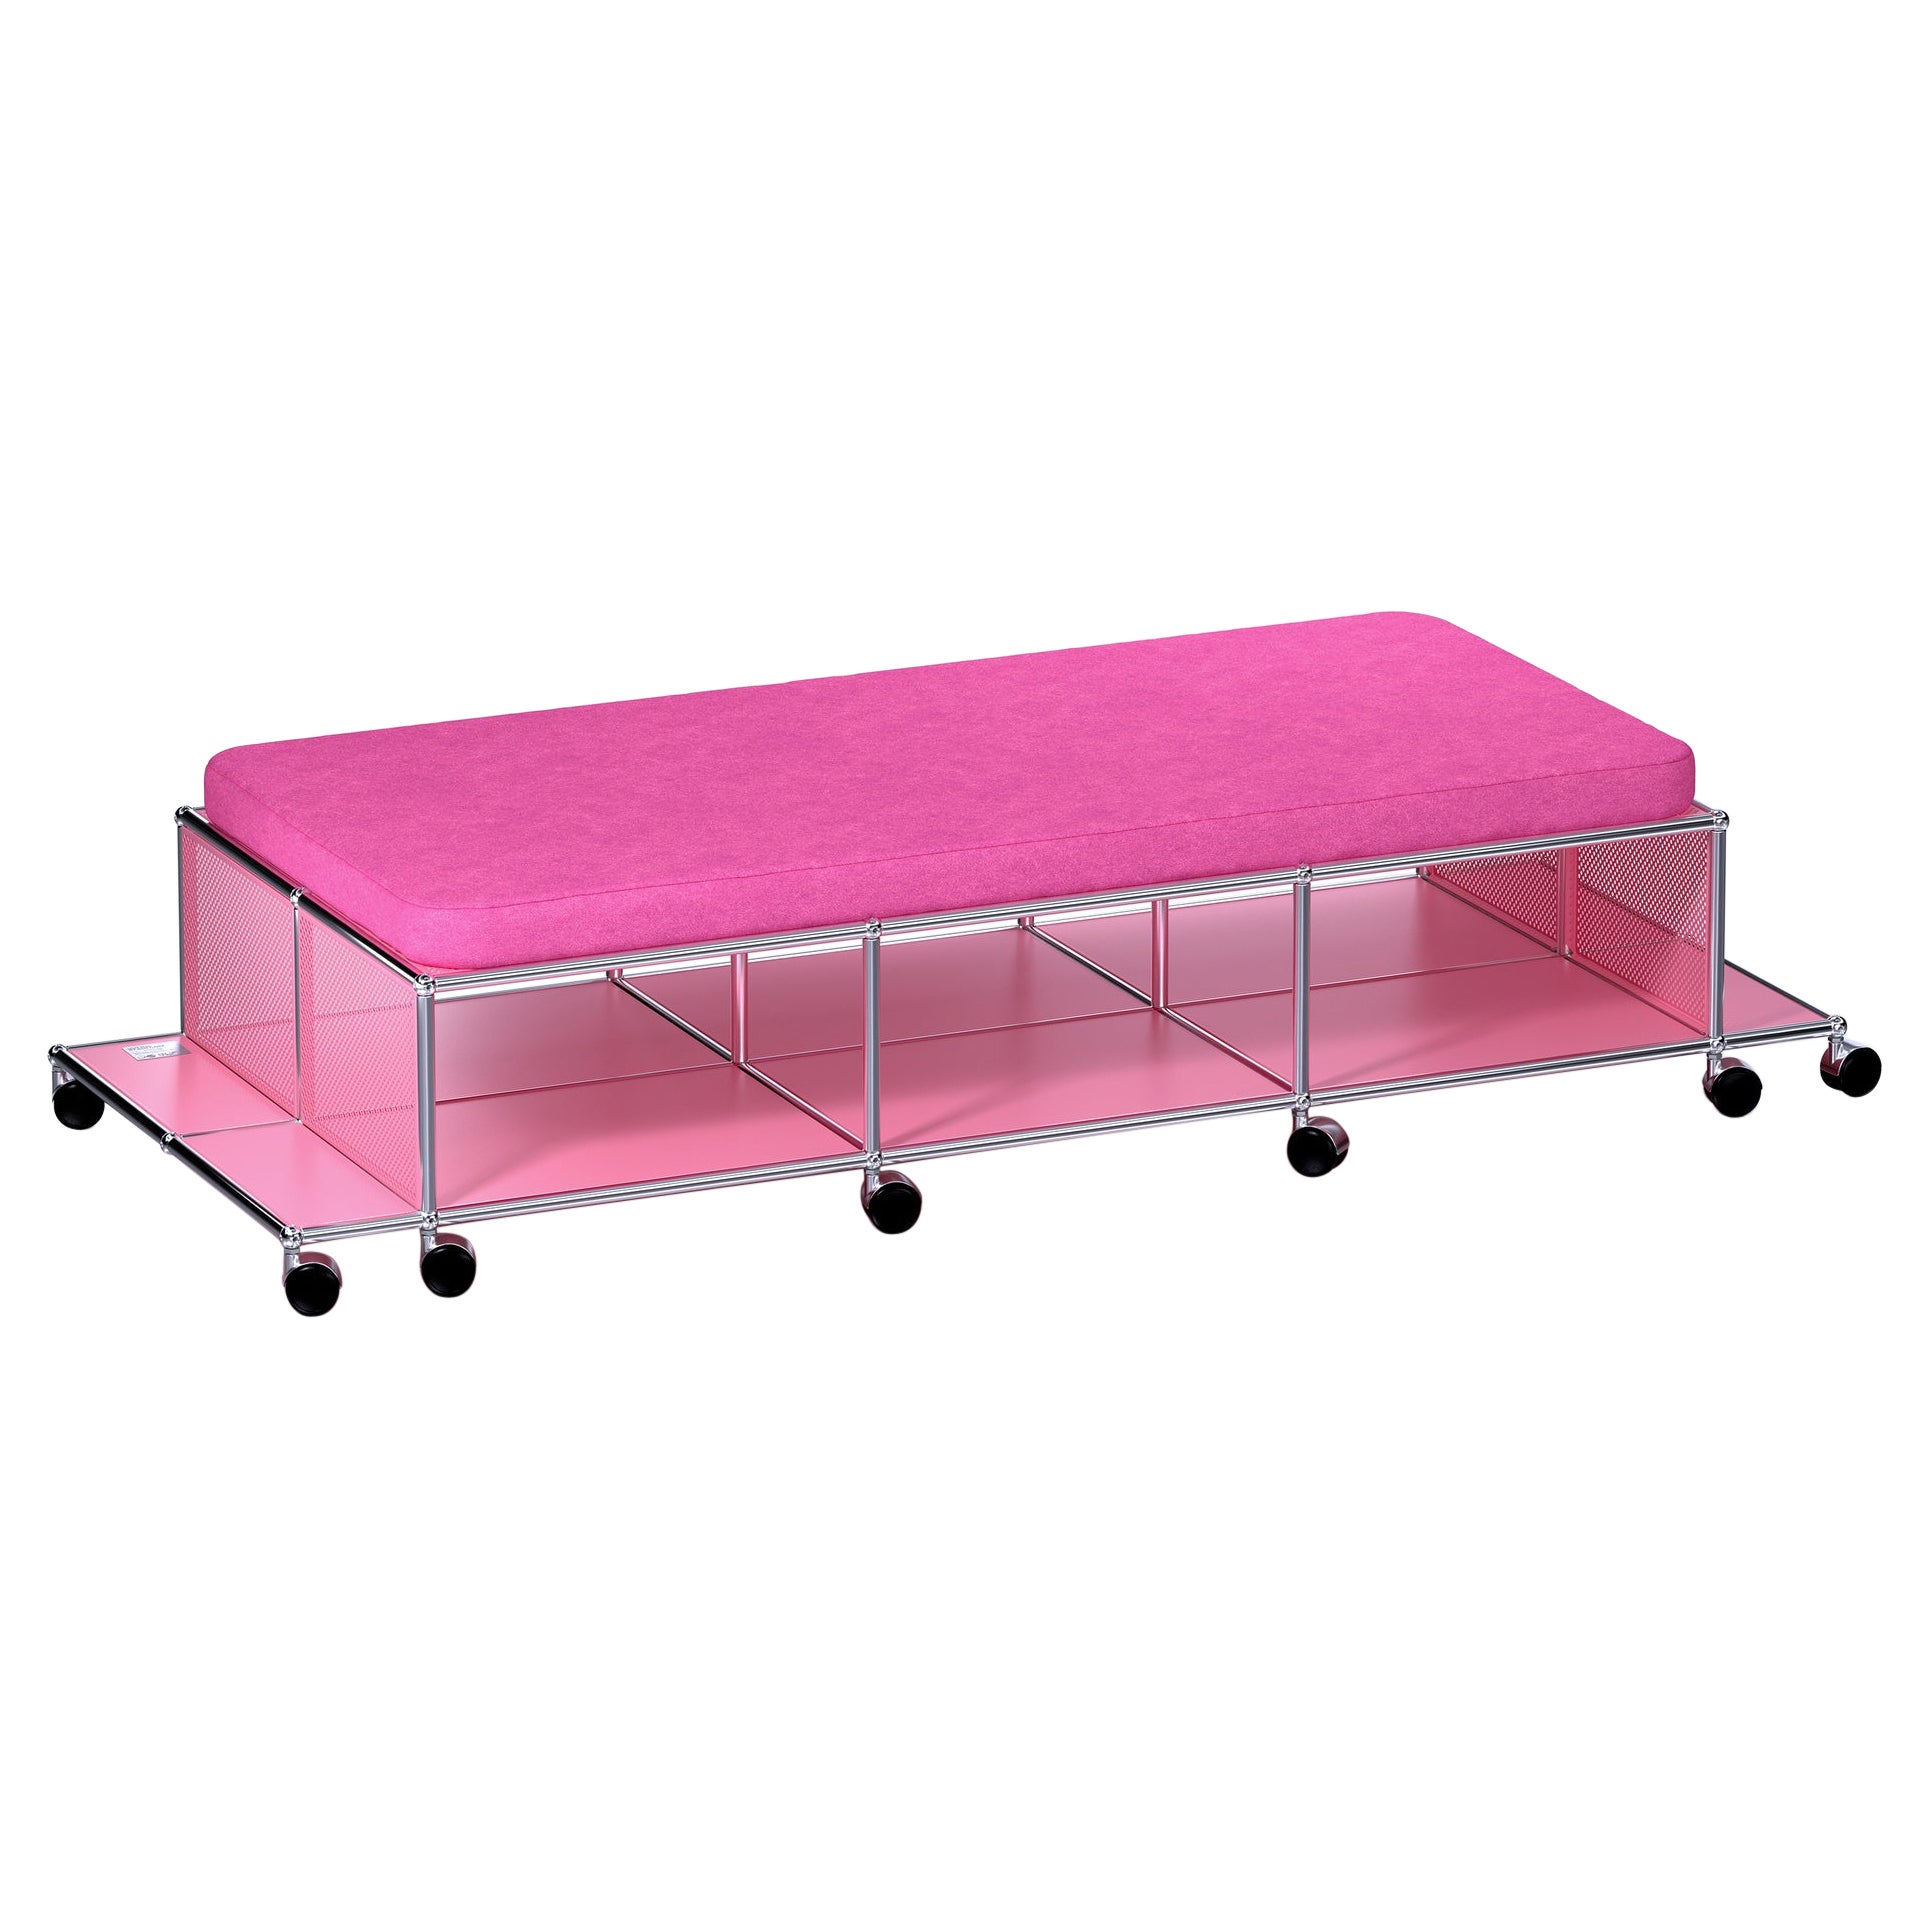 Limited Edition NEW USM Downtown Pink Central Lounge by Ben Ganz in STOCK For Sale